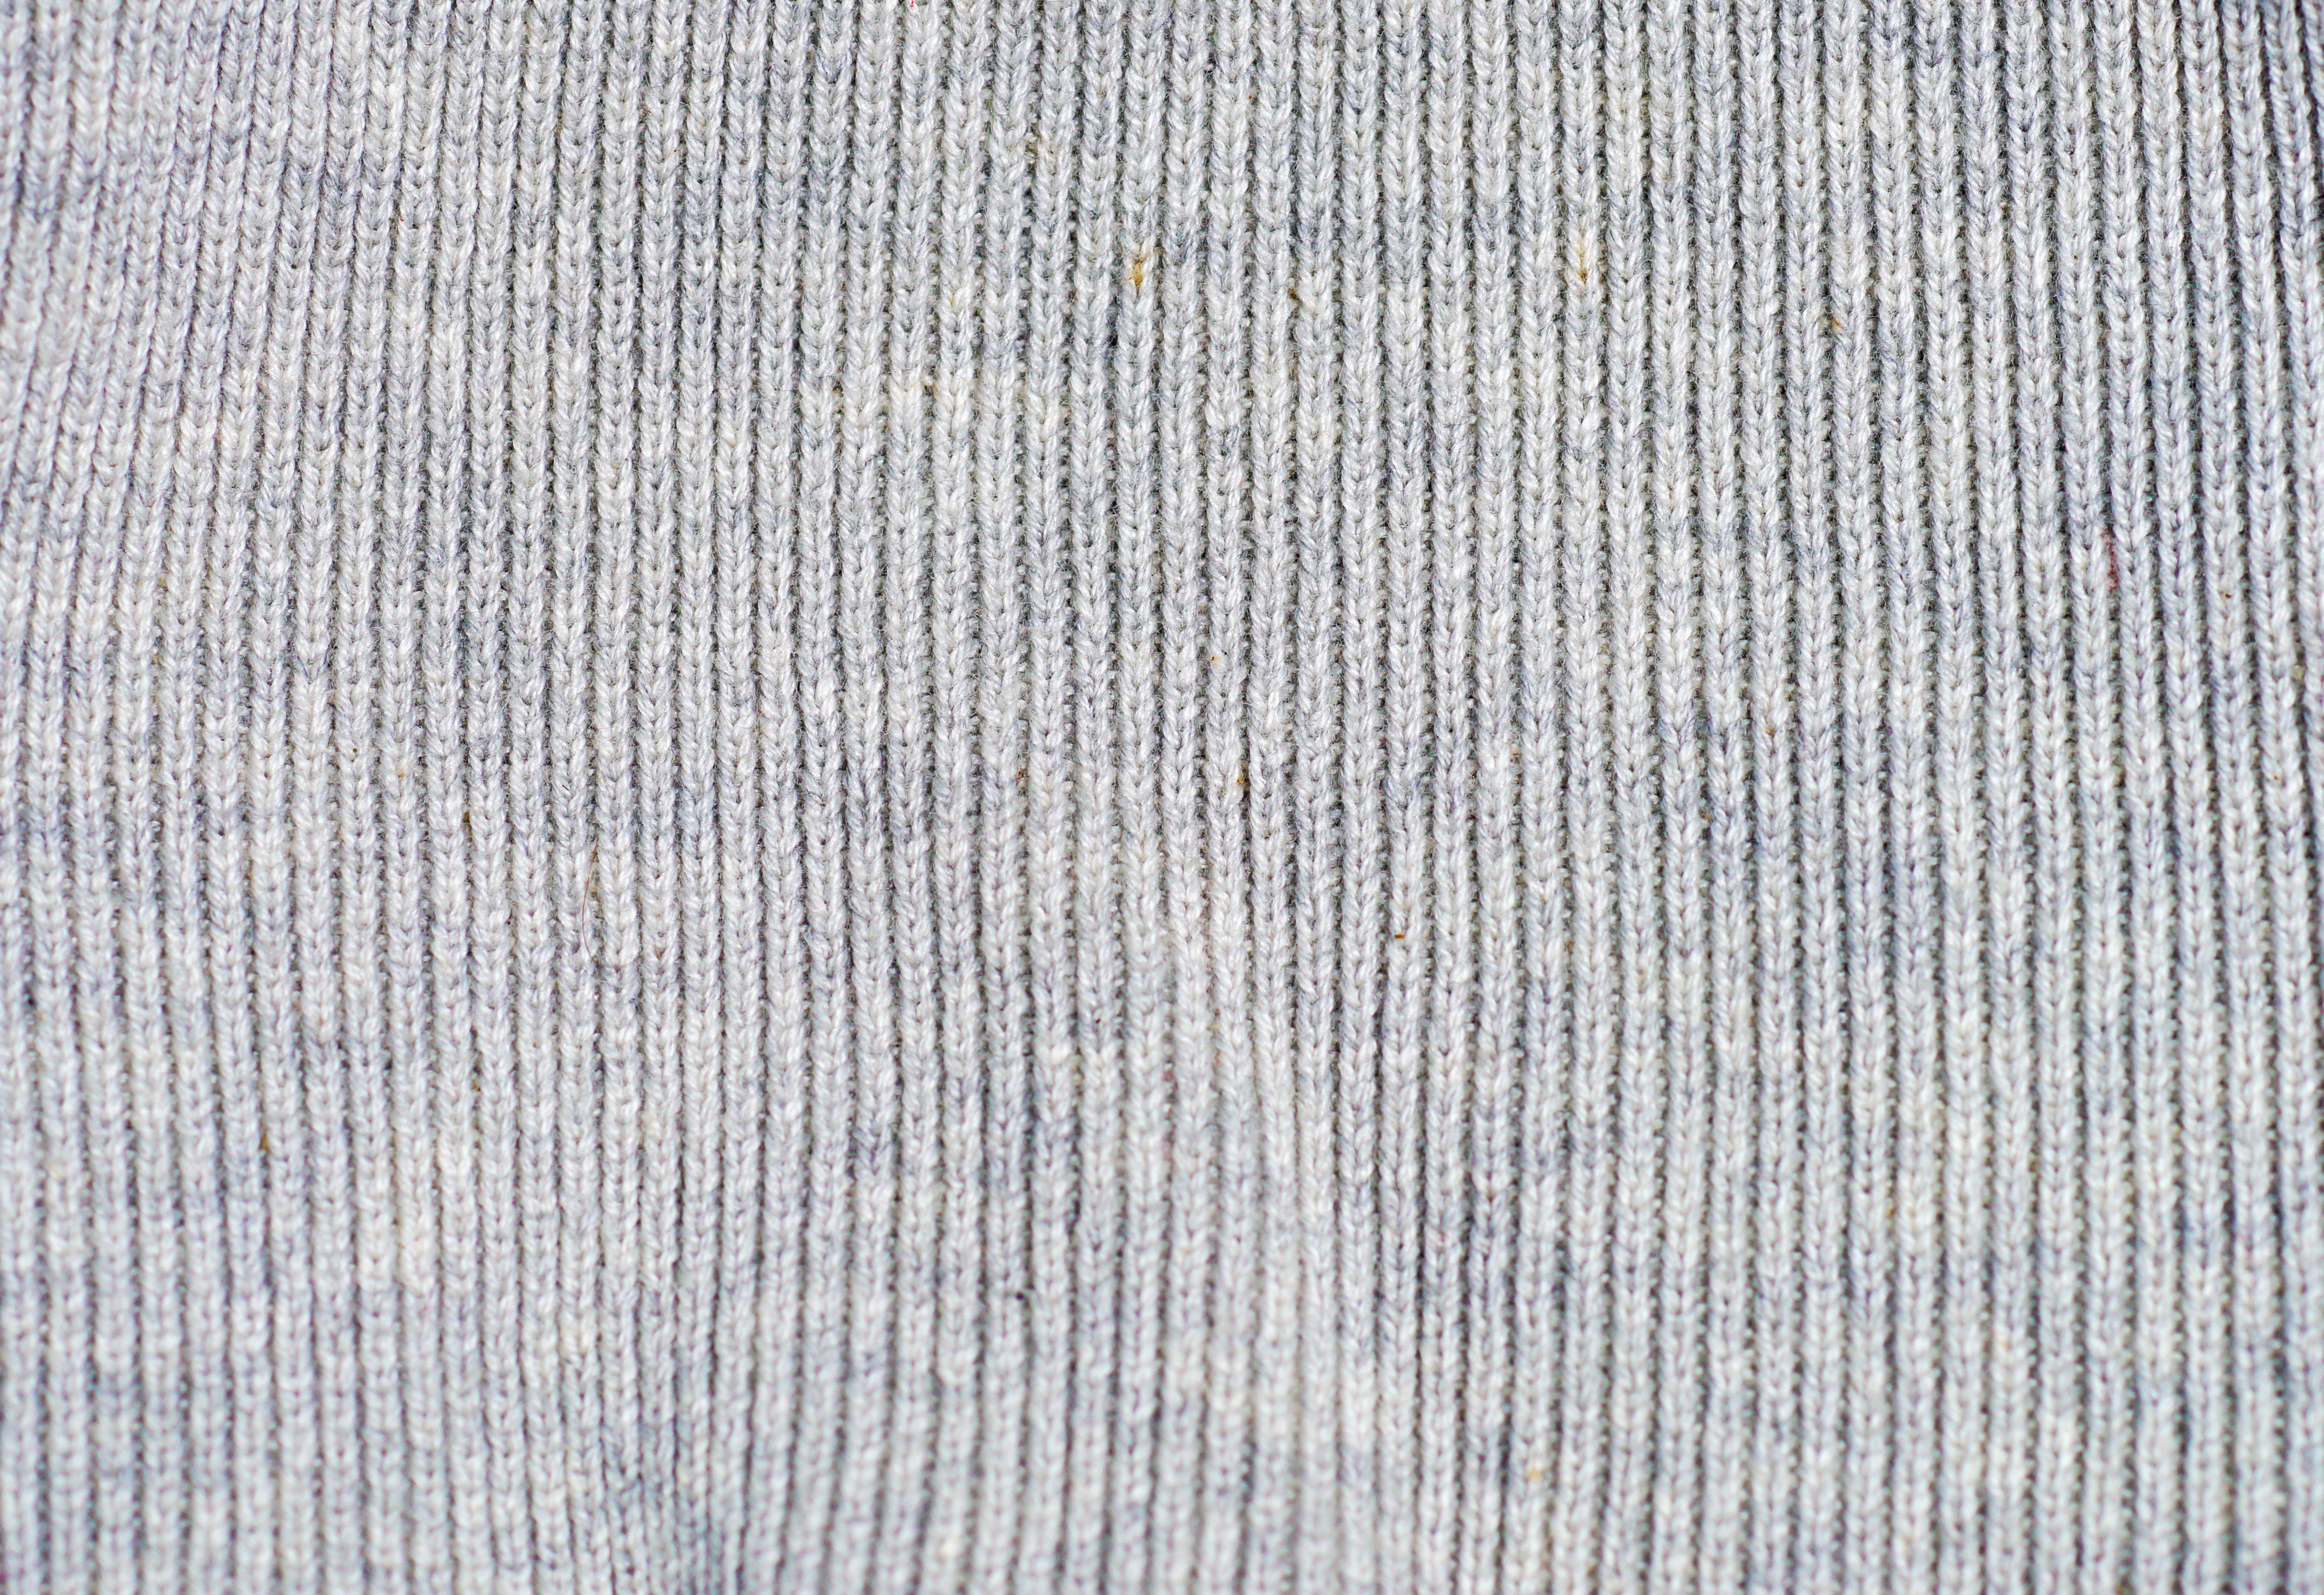 Two Grey Background Of Knit Wool Fabric Textures